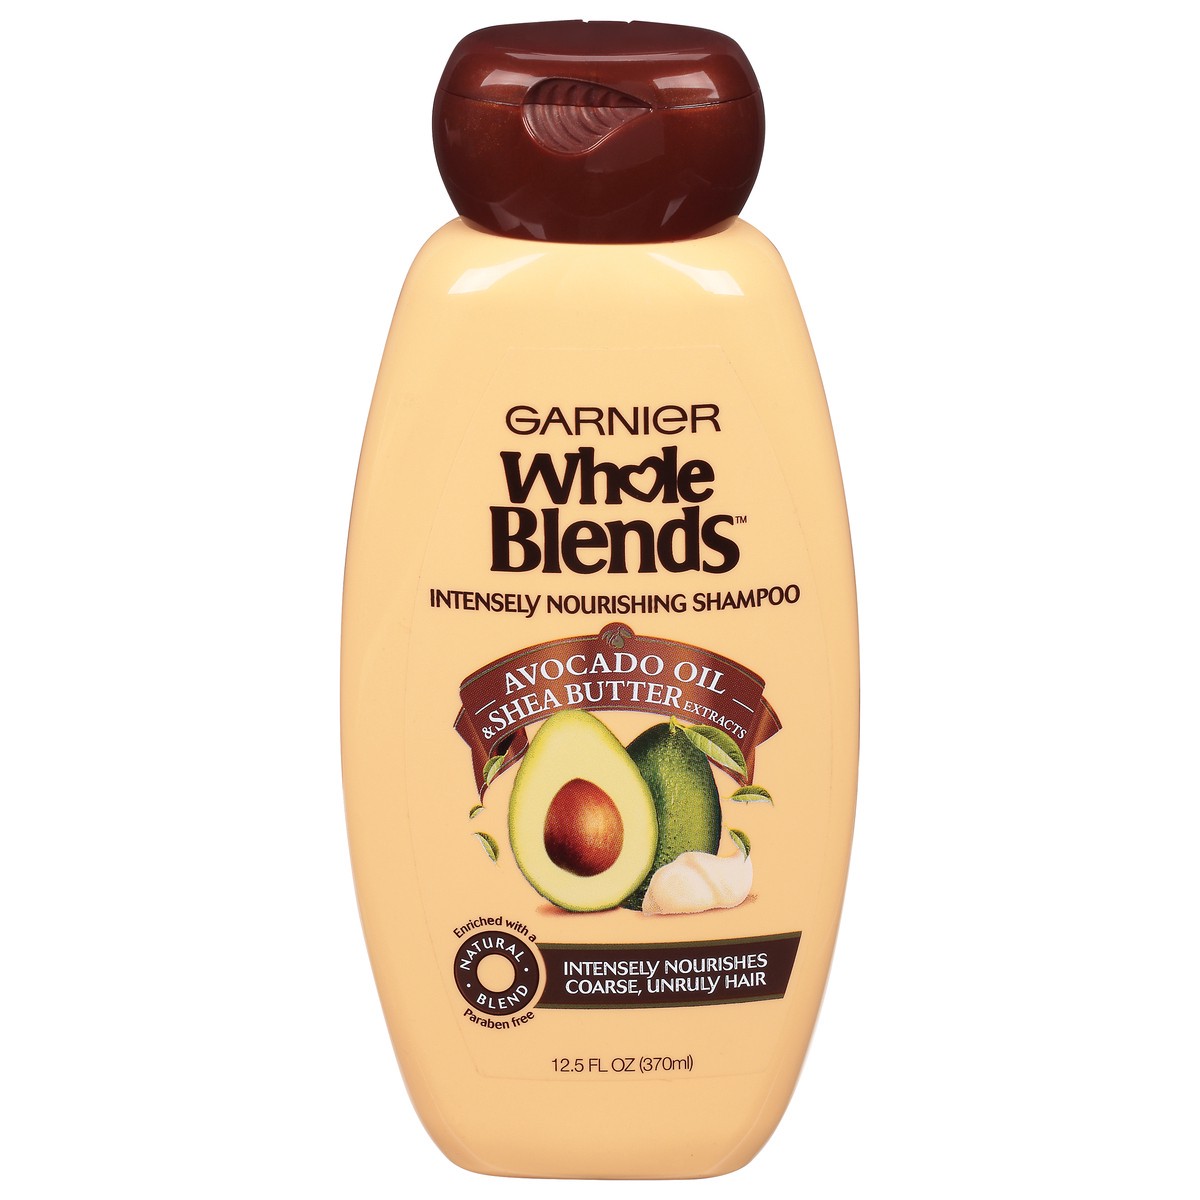 slide 1 of 10, Whole Blends Intensely Nourishing Avocado Oil & Shea Butter Extracts Shampoo 12.5 fl oz, 12.5 fl oz